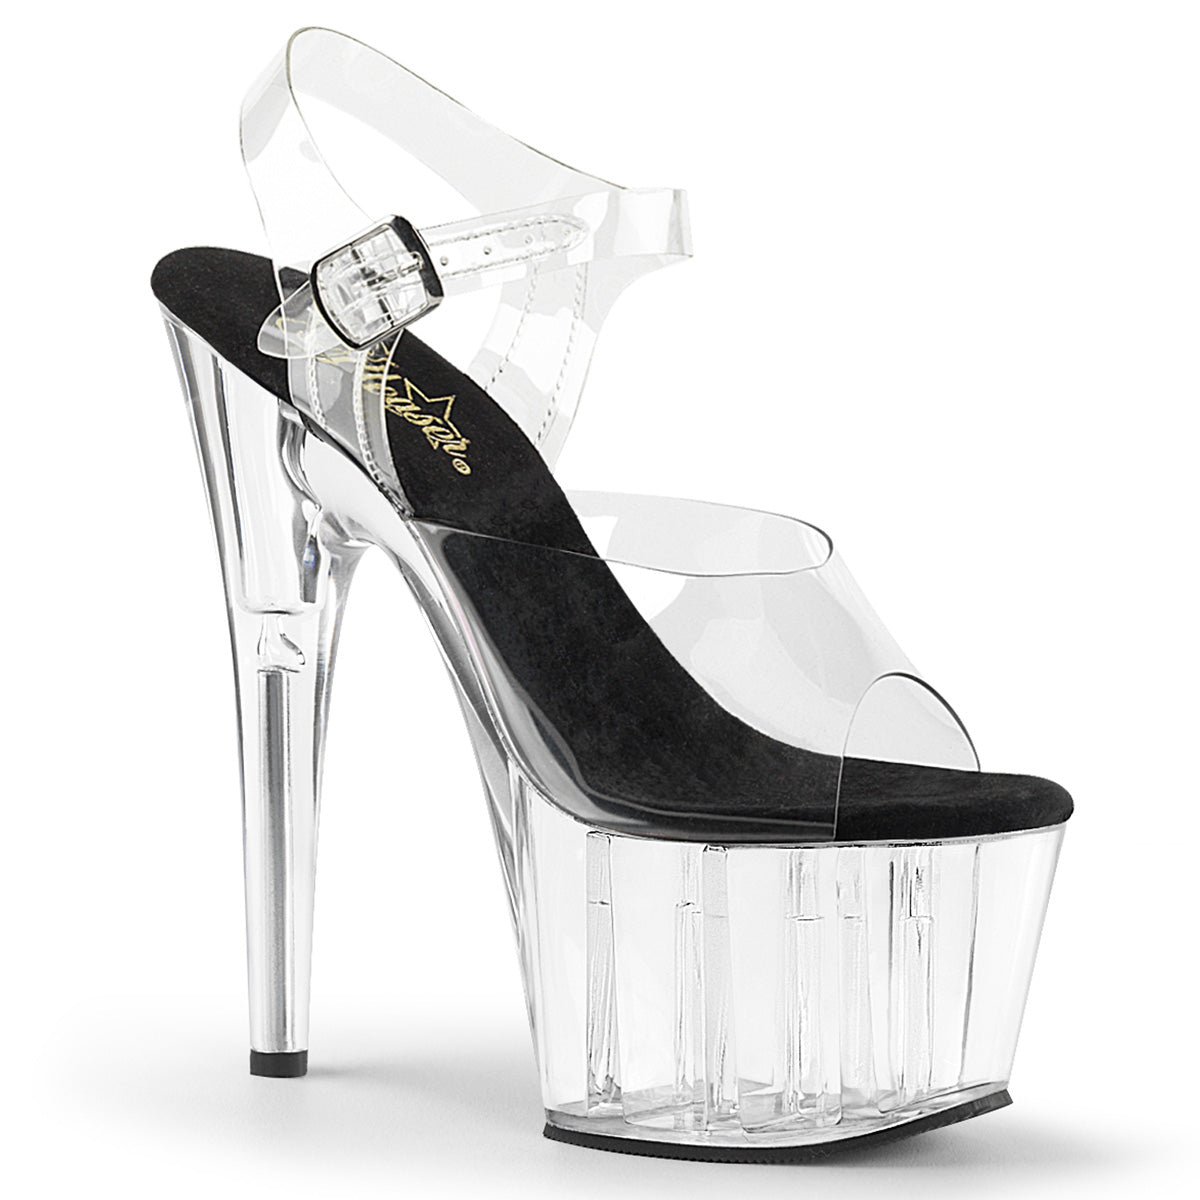 The right side of the 7" Adore Clear and Black Ankle Strap Heels.